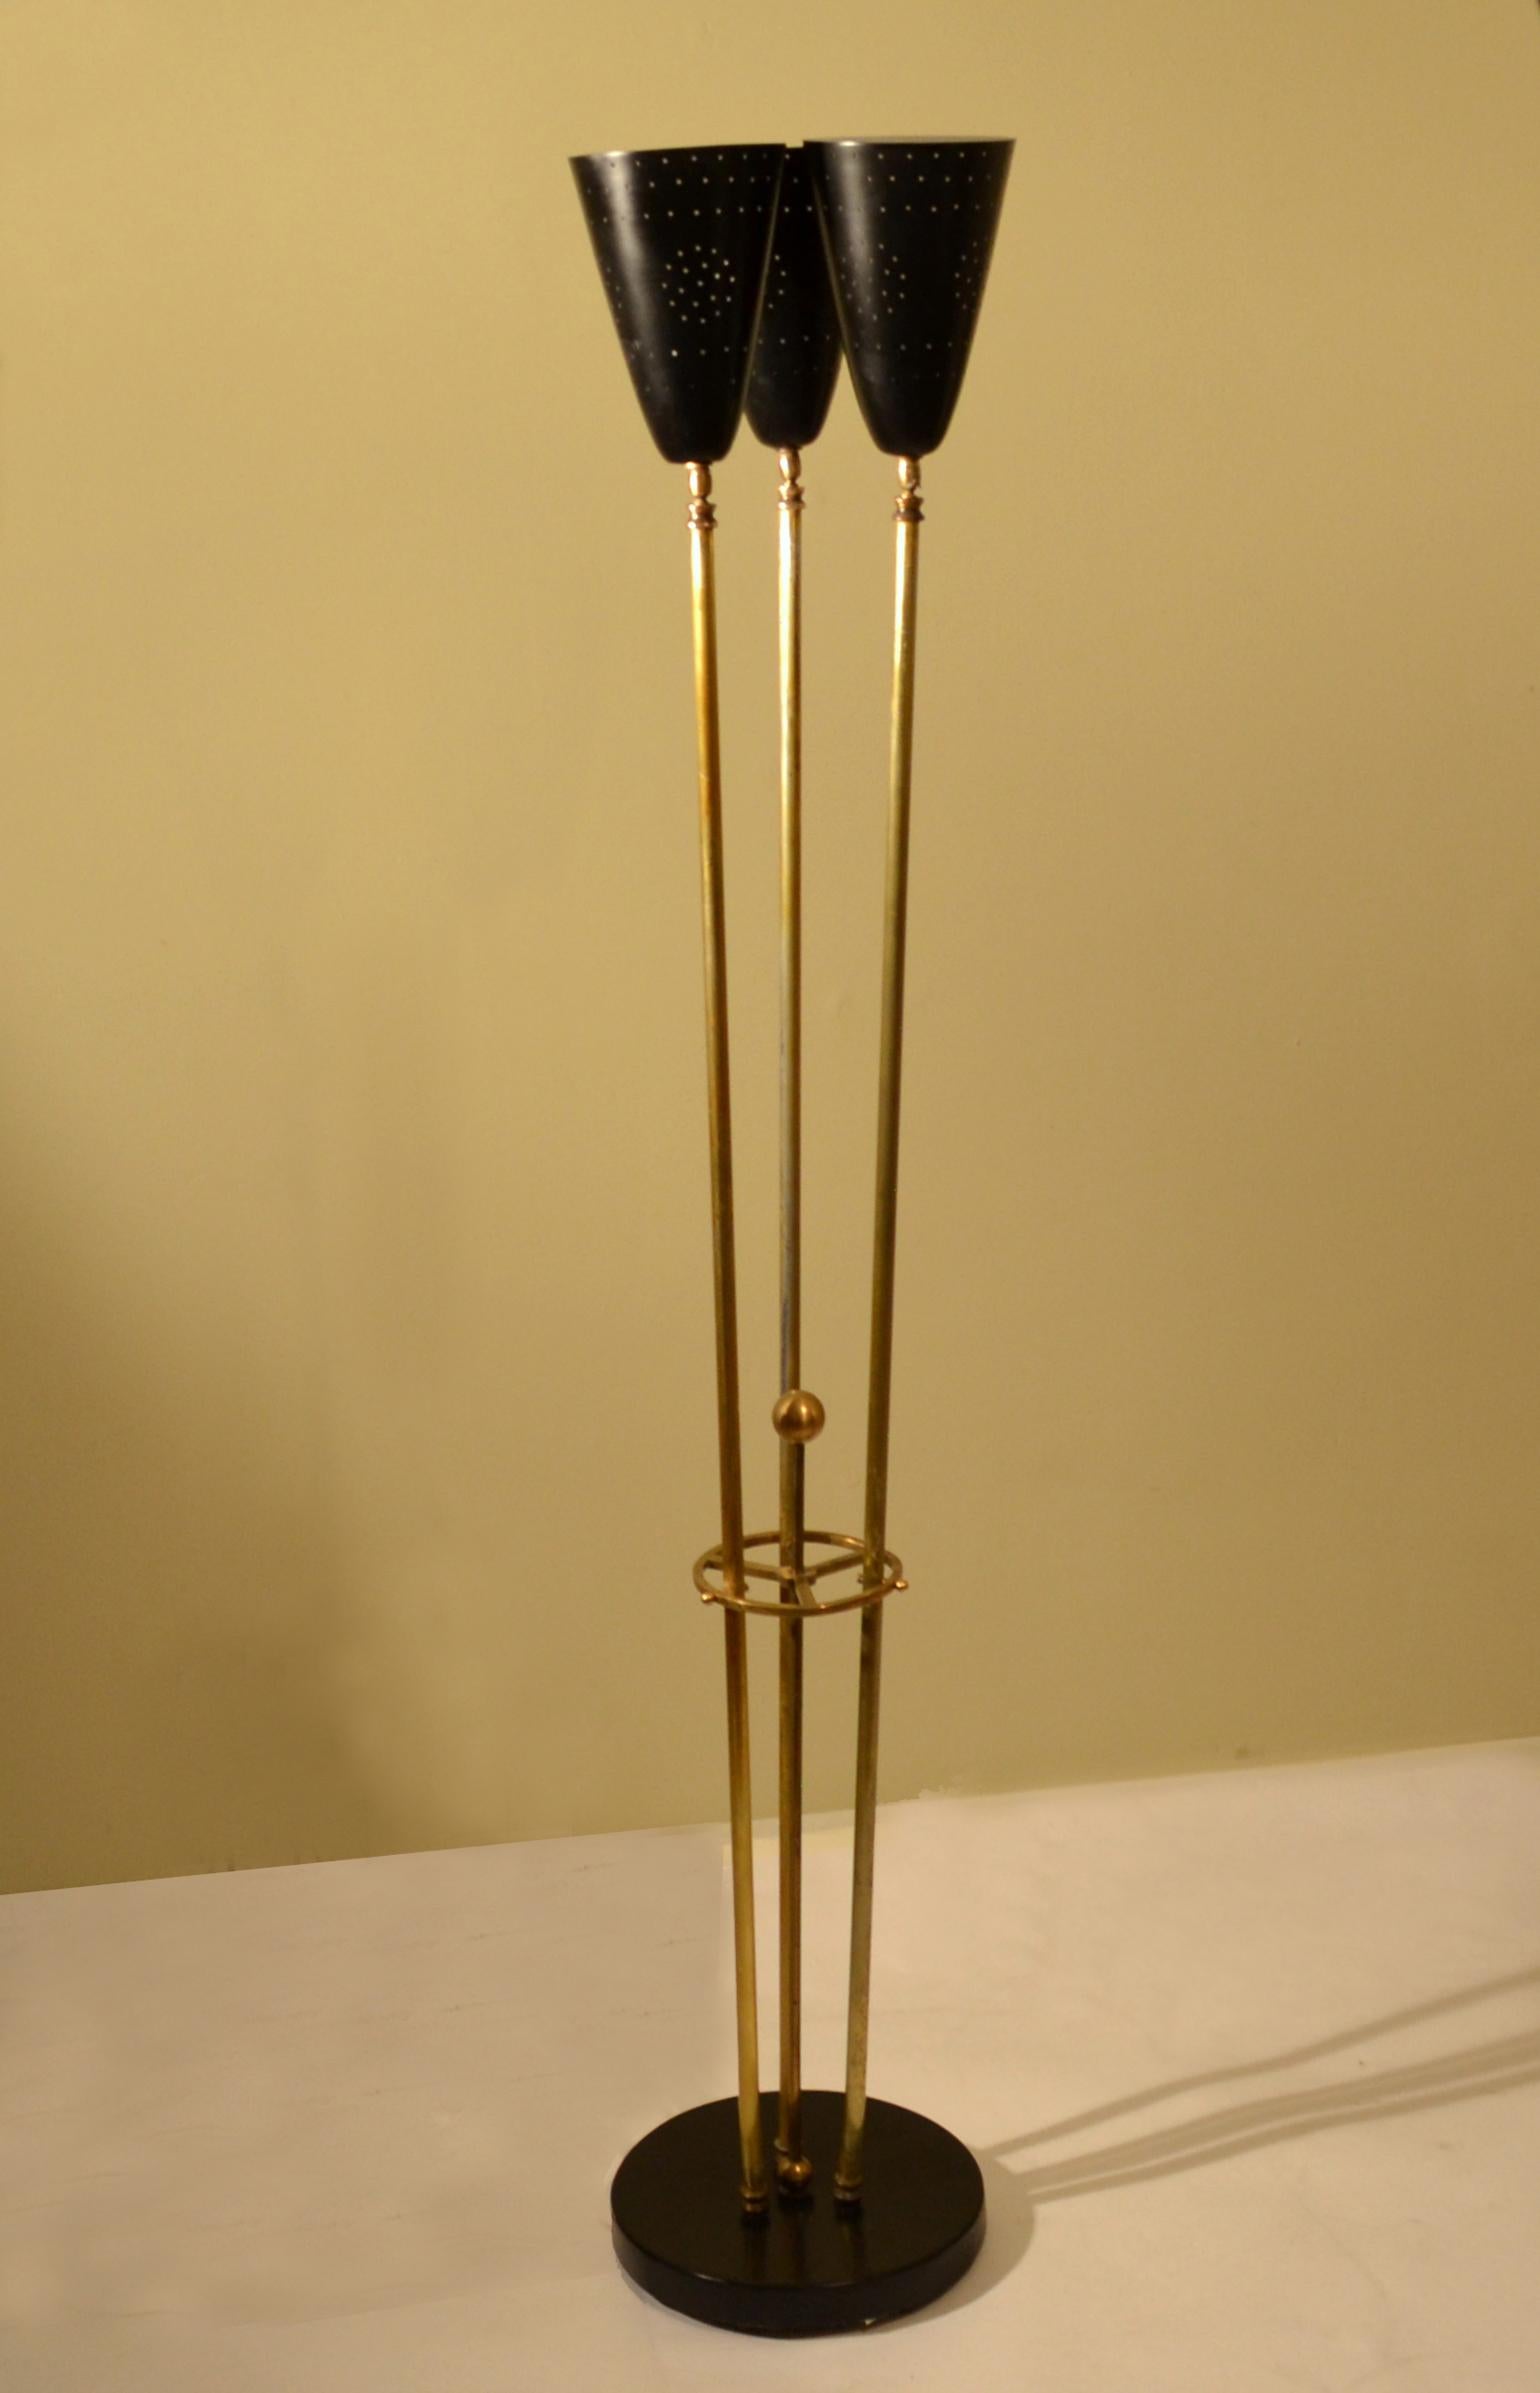 Mid-20th Century Italian 1950s Floor Lamp with Articulated Black Perforated Shades and Brass